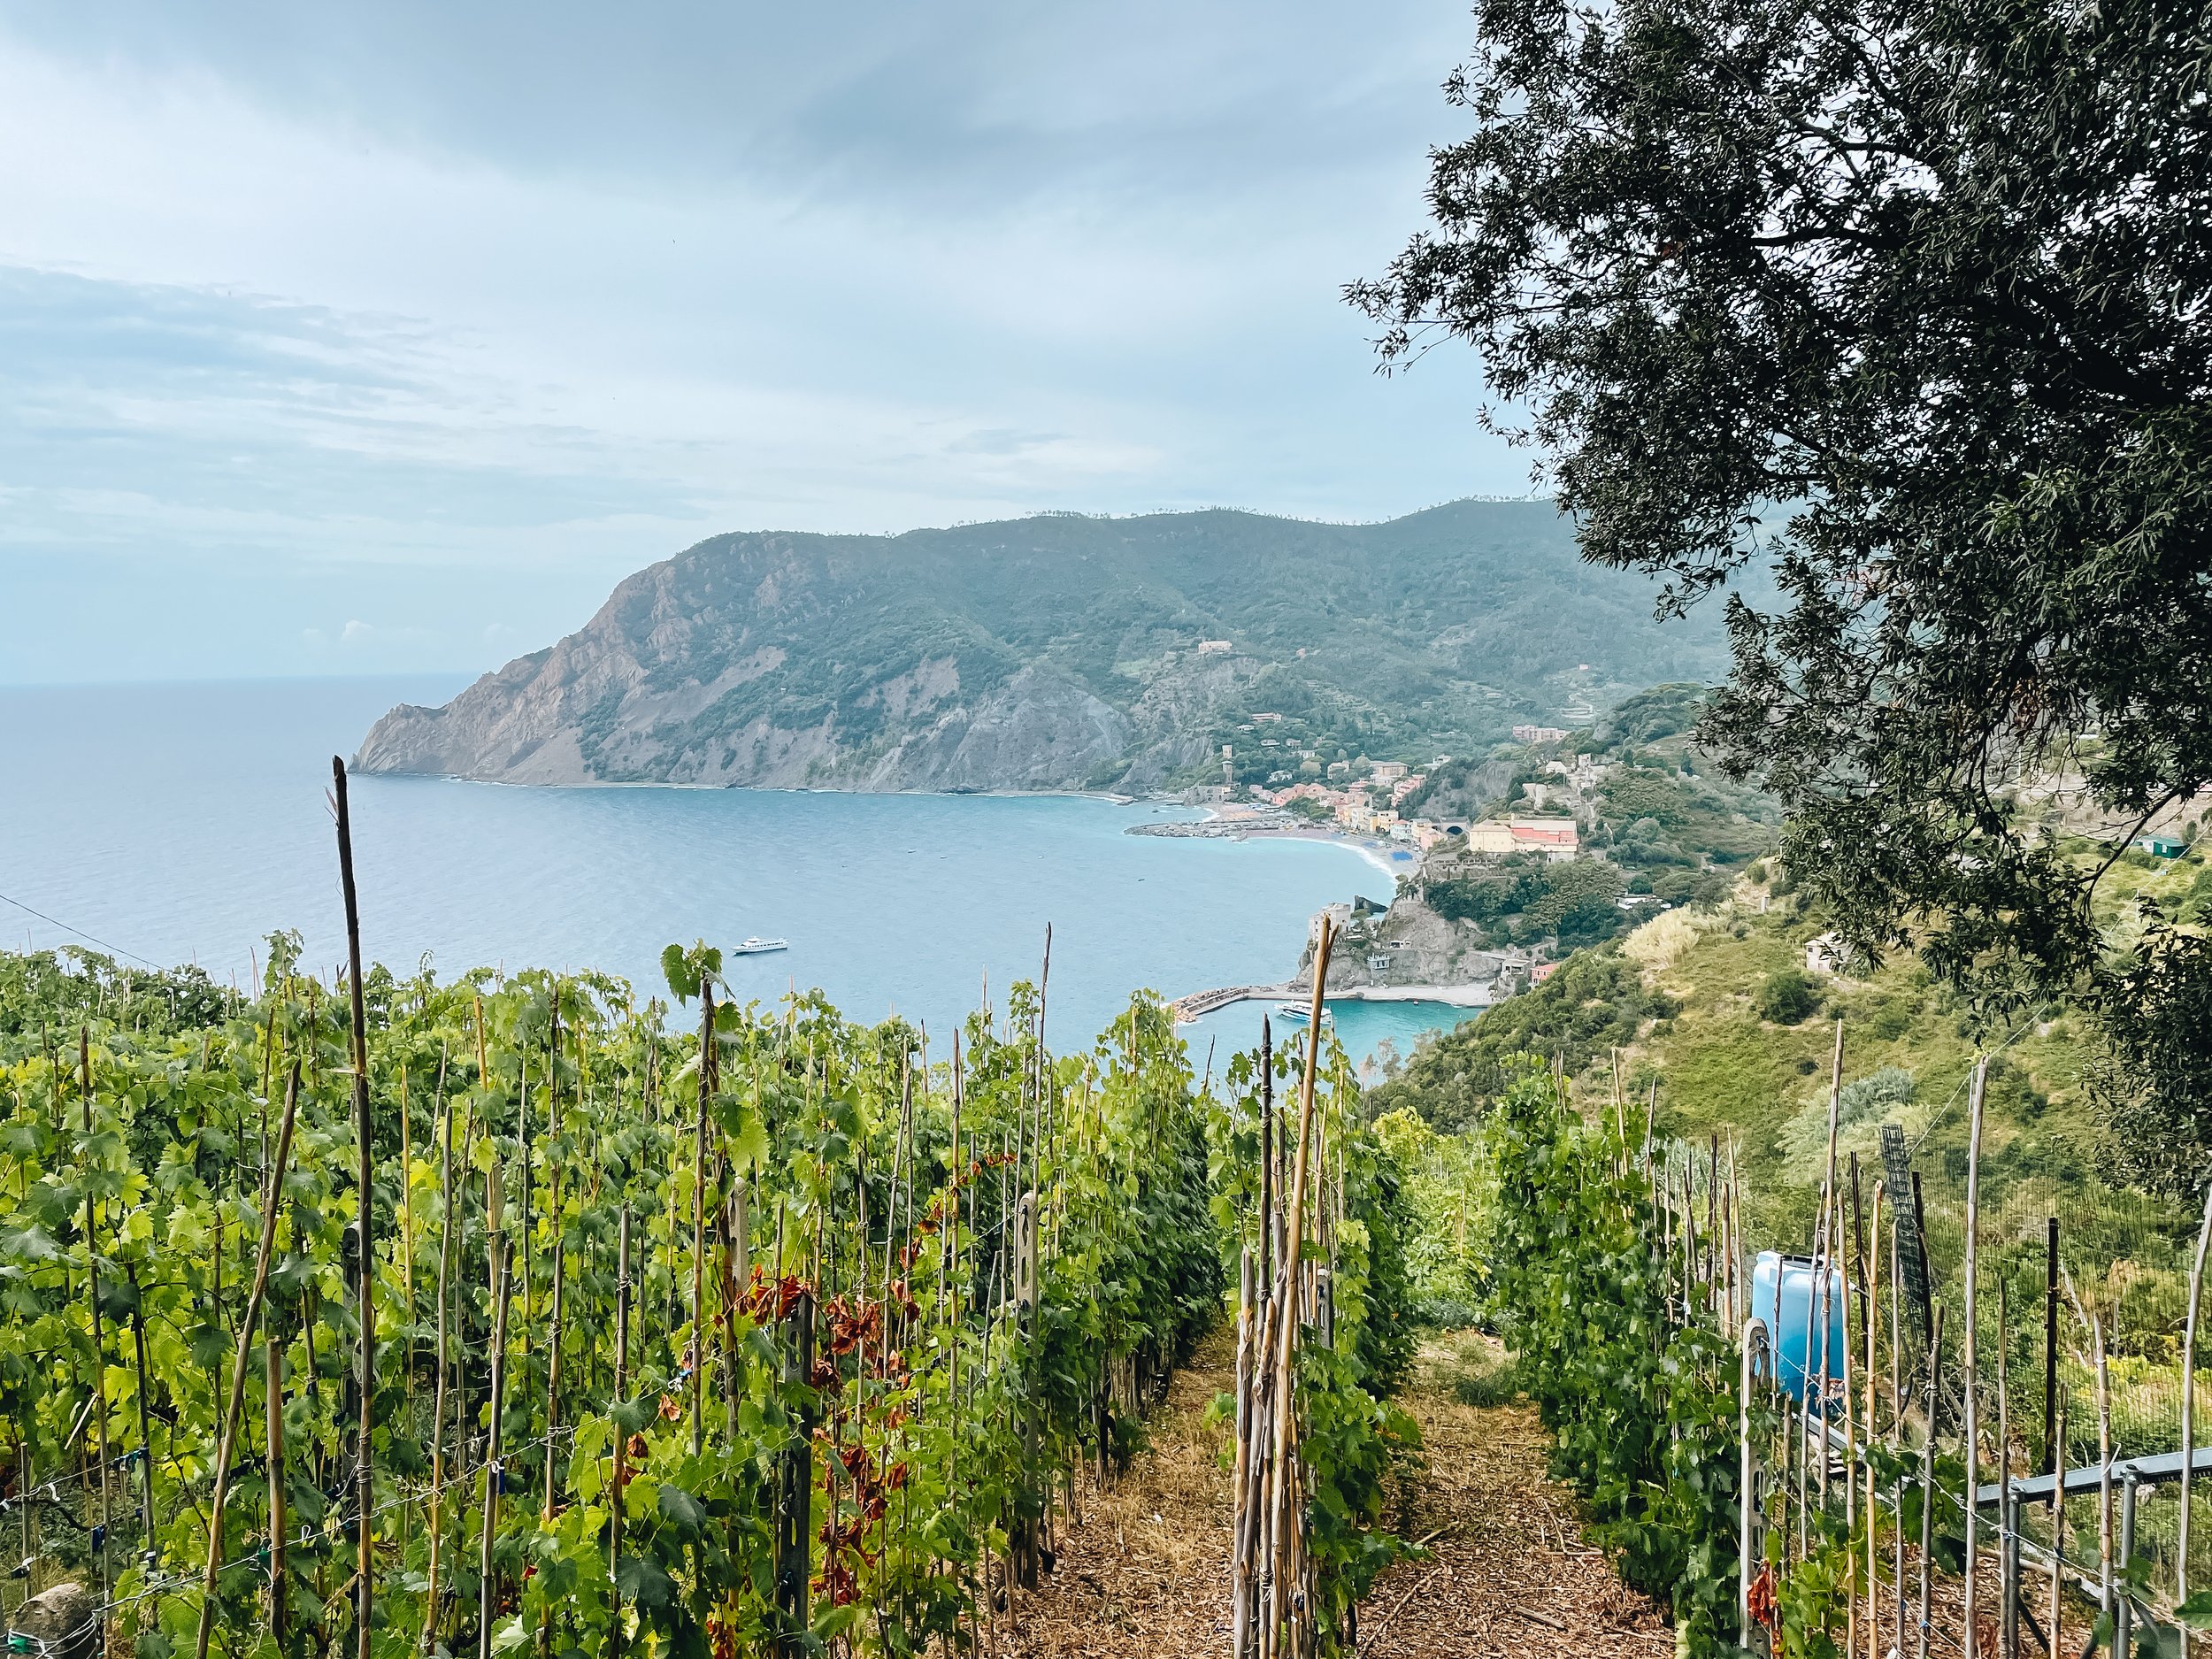 The hike from Monterosso al Mare to Vernazza